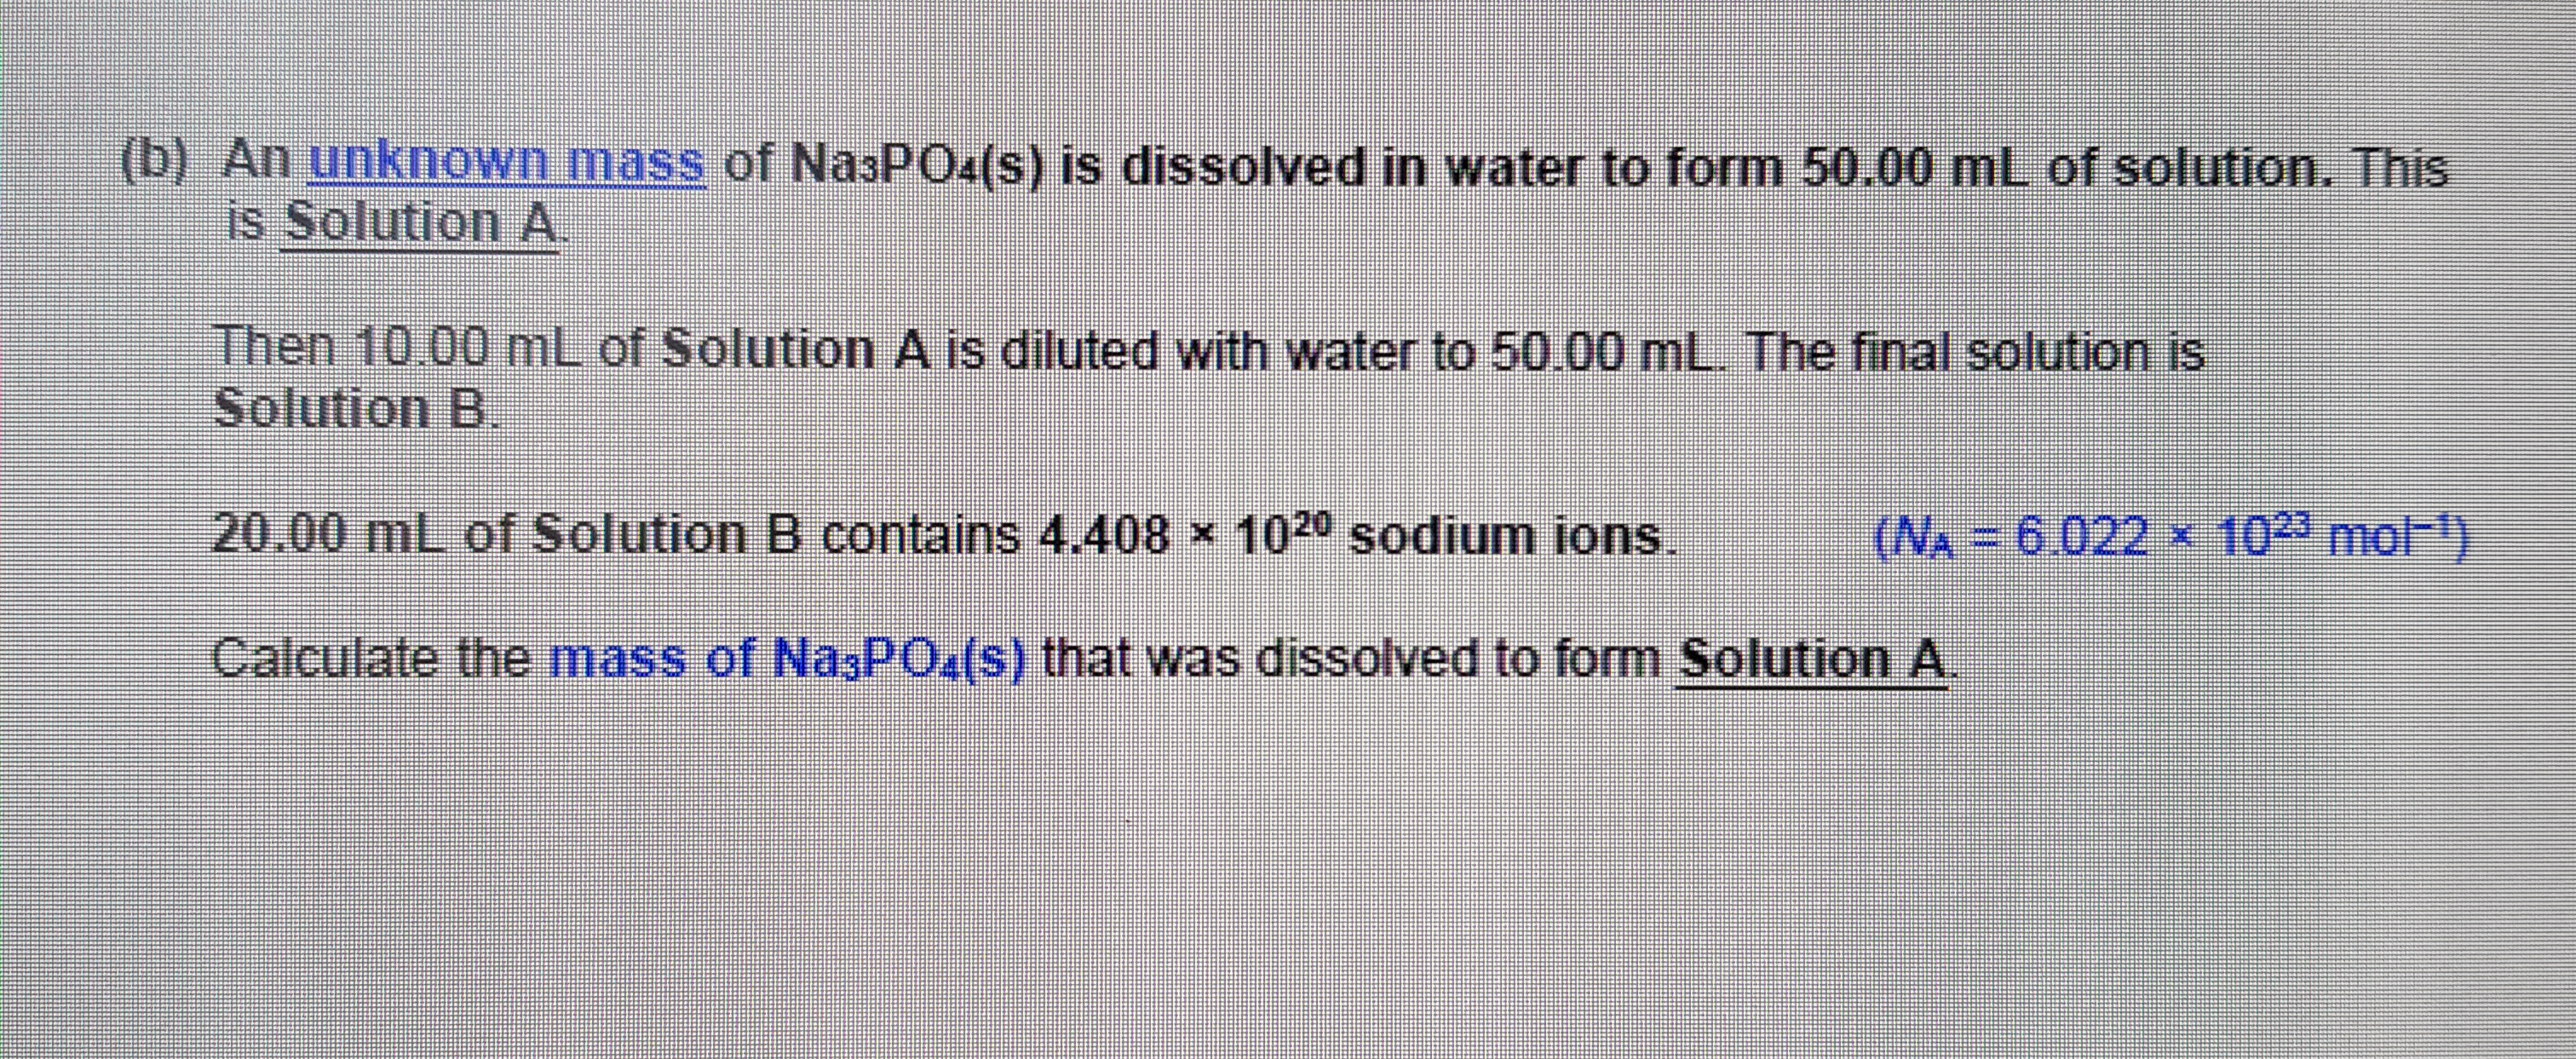 An unknown mass of NasPO4(s) is dissolved in water to form 50.00 mL of solution. This
is Solution A.
Then 10.00 mL of Solution A is diluted with water to 50.00 mL. The final solution is
Solution B.
